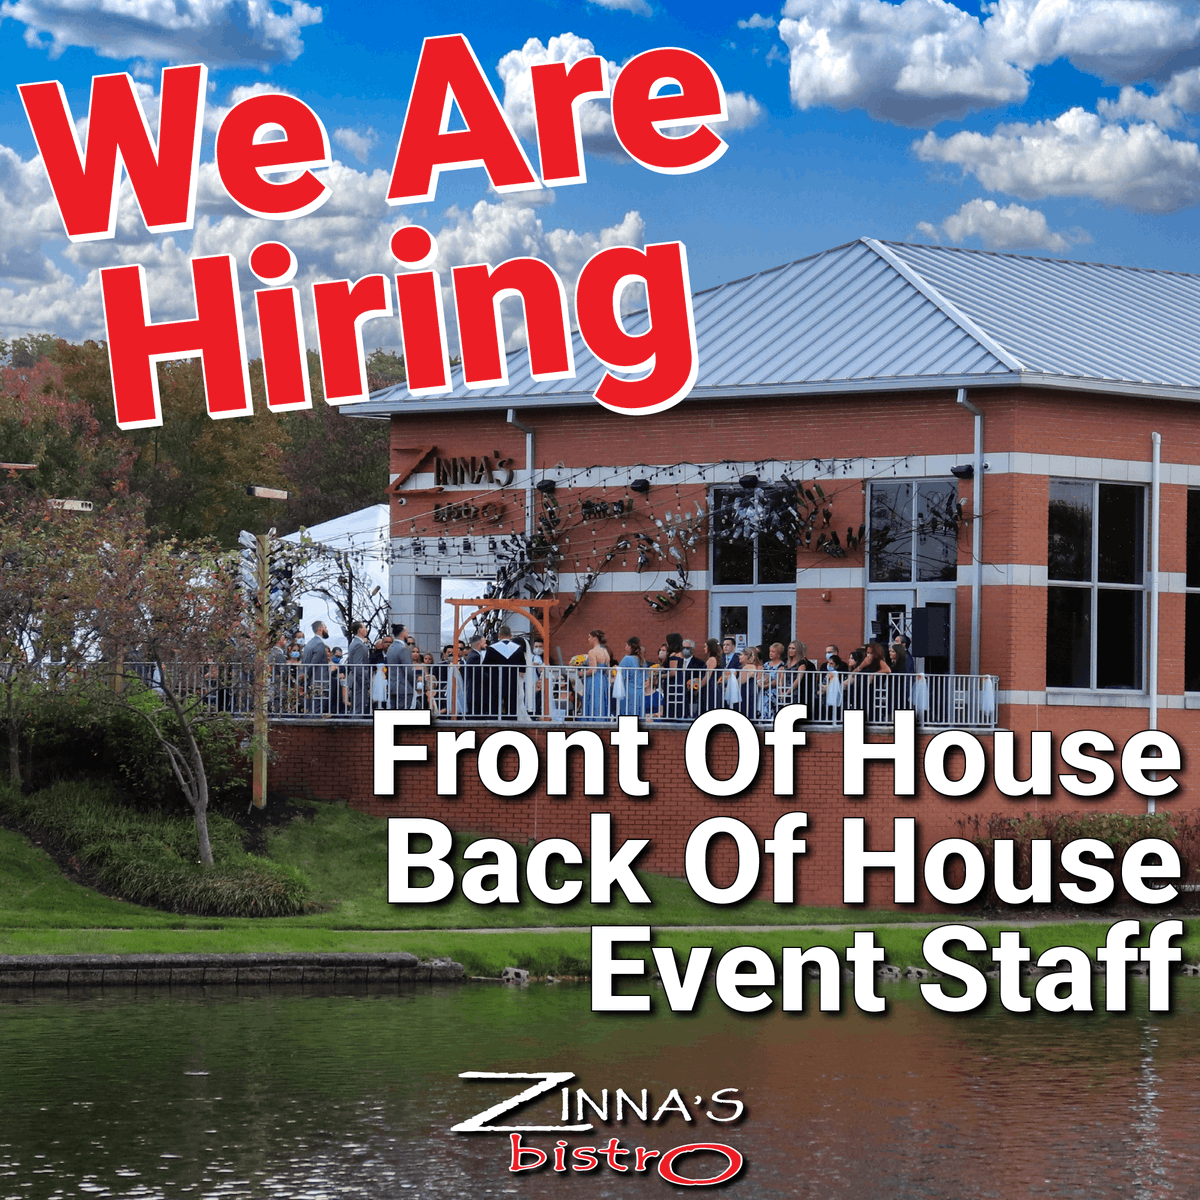 ⭐⭐⭐⭐⭐⭐⭐⭐
JOIN THE Z TEAM!
⭐⭐⭐⭐⭐⭐⭐⭐

We have an immediate opening for our front and back of house staff. 

Please call the restaurant to speak with our managers for more info 
☎️ (609) 860-9600

#ZinnasBistro #NowHIriing